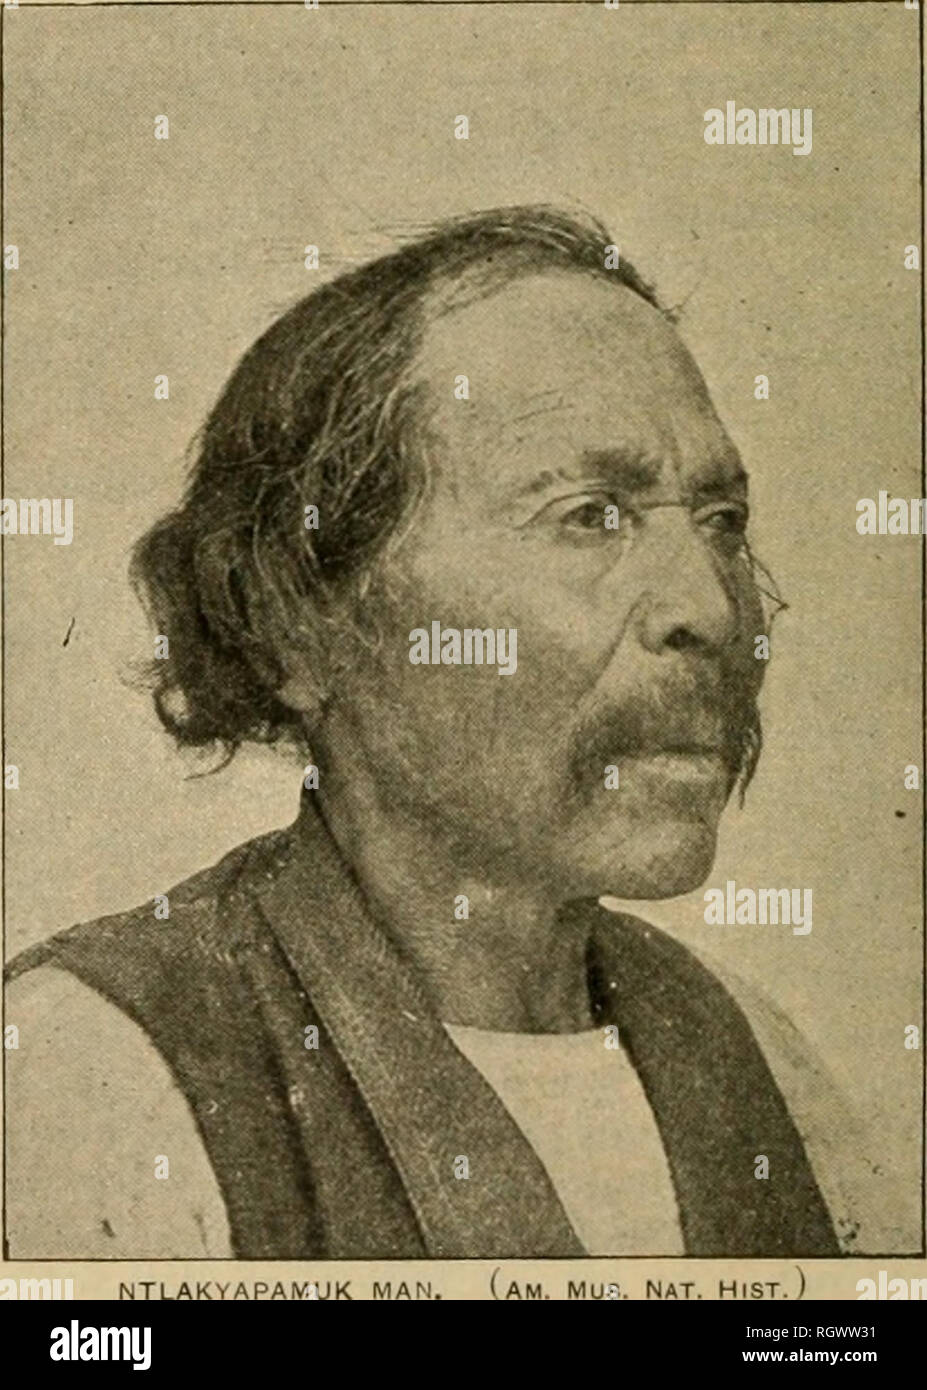 . Bulletin. Ethnology. NOWI—NTLAKYAPAMUK [b. a. e. Nowi. A Yukonikhotana village on the s. side of Yukon r., at the mouth of Nowikakat r., Alaska, having 107 inhabi- tants in 1880. Newi-cargut.—Wymper, Trav. and Advent., map, 1809. Newikargiit.—Raymond in Sen. Ex. Doc. 12, 42d Cong., l8t sess., 23,1871. Nowikakat.—Petroff, Rep. on Alaska, 62, 1881. Noya-kakat.—Petroff, map of Alaska, 1880. Noyokakat.—Petroff in lOtli Census, Alaska, 12, 1884. Noxa. Mentioned by Oviedo (Hist. Gen. Indies, iii, 628, 1853) as one of the provinces or villages visited by Ayllon in 1520; probably on the South Caroli Stock Photo